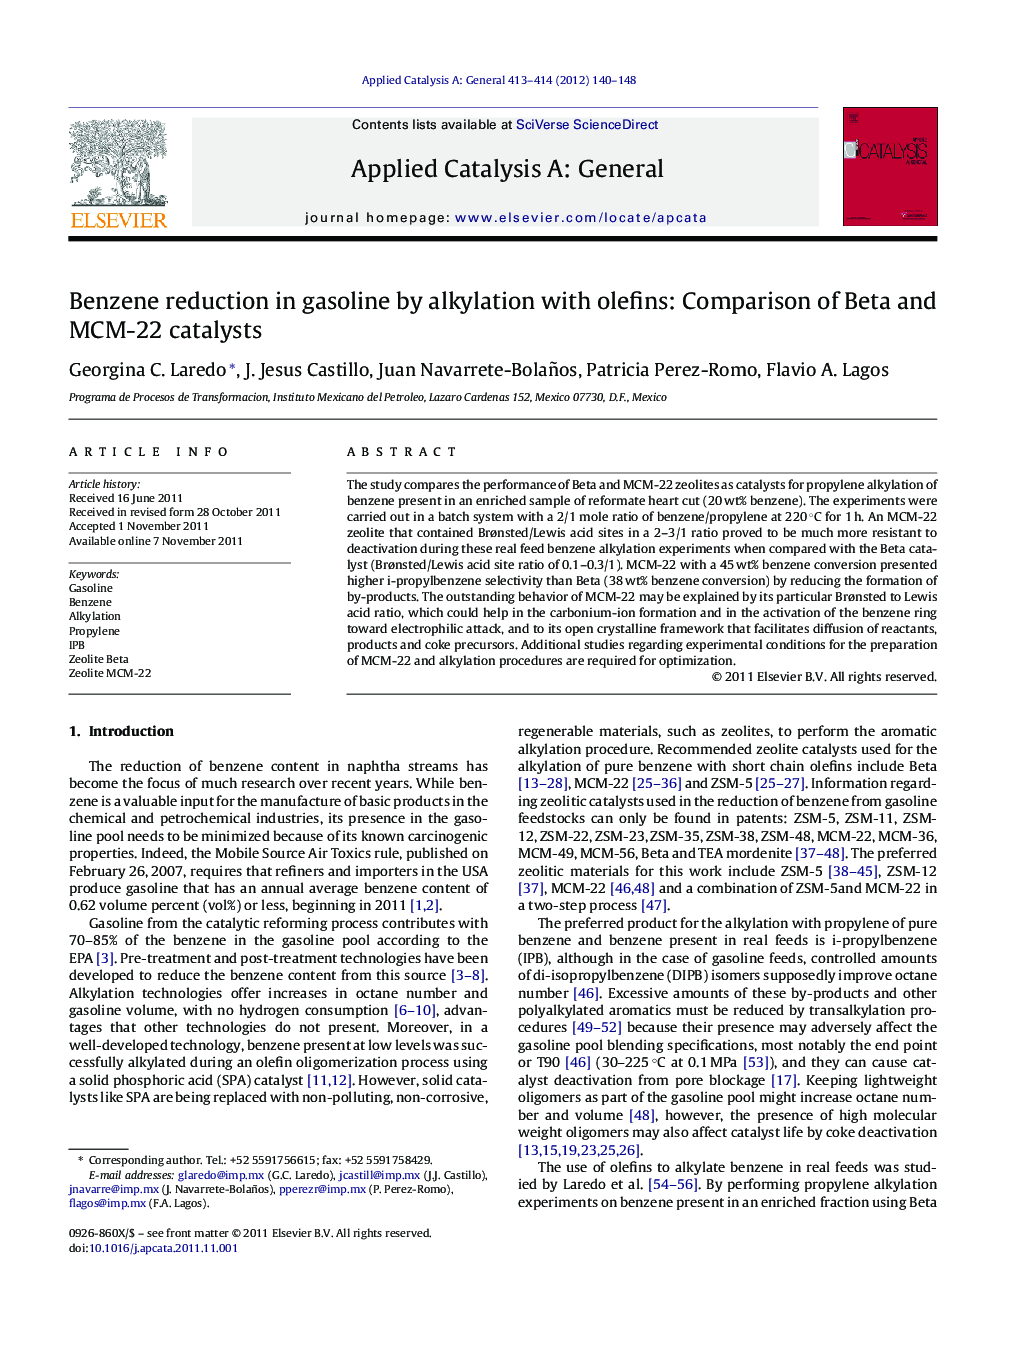 Benzene reduction in gasoline by alkylation with olefins: Comparison of Beta and MCM-22 catalysts